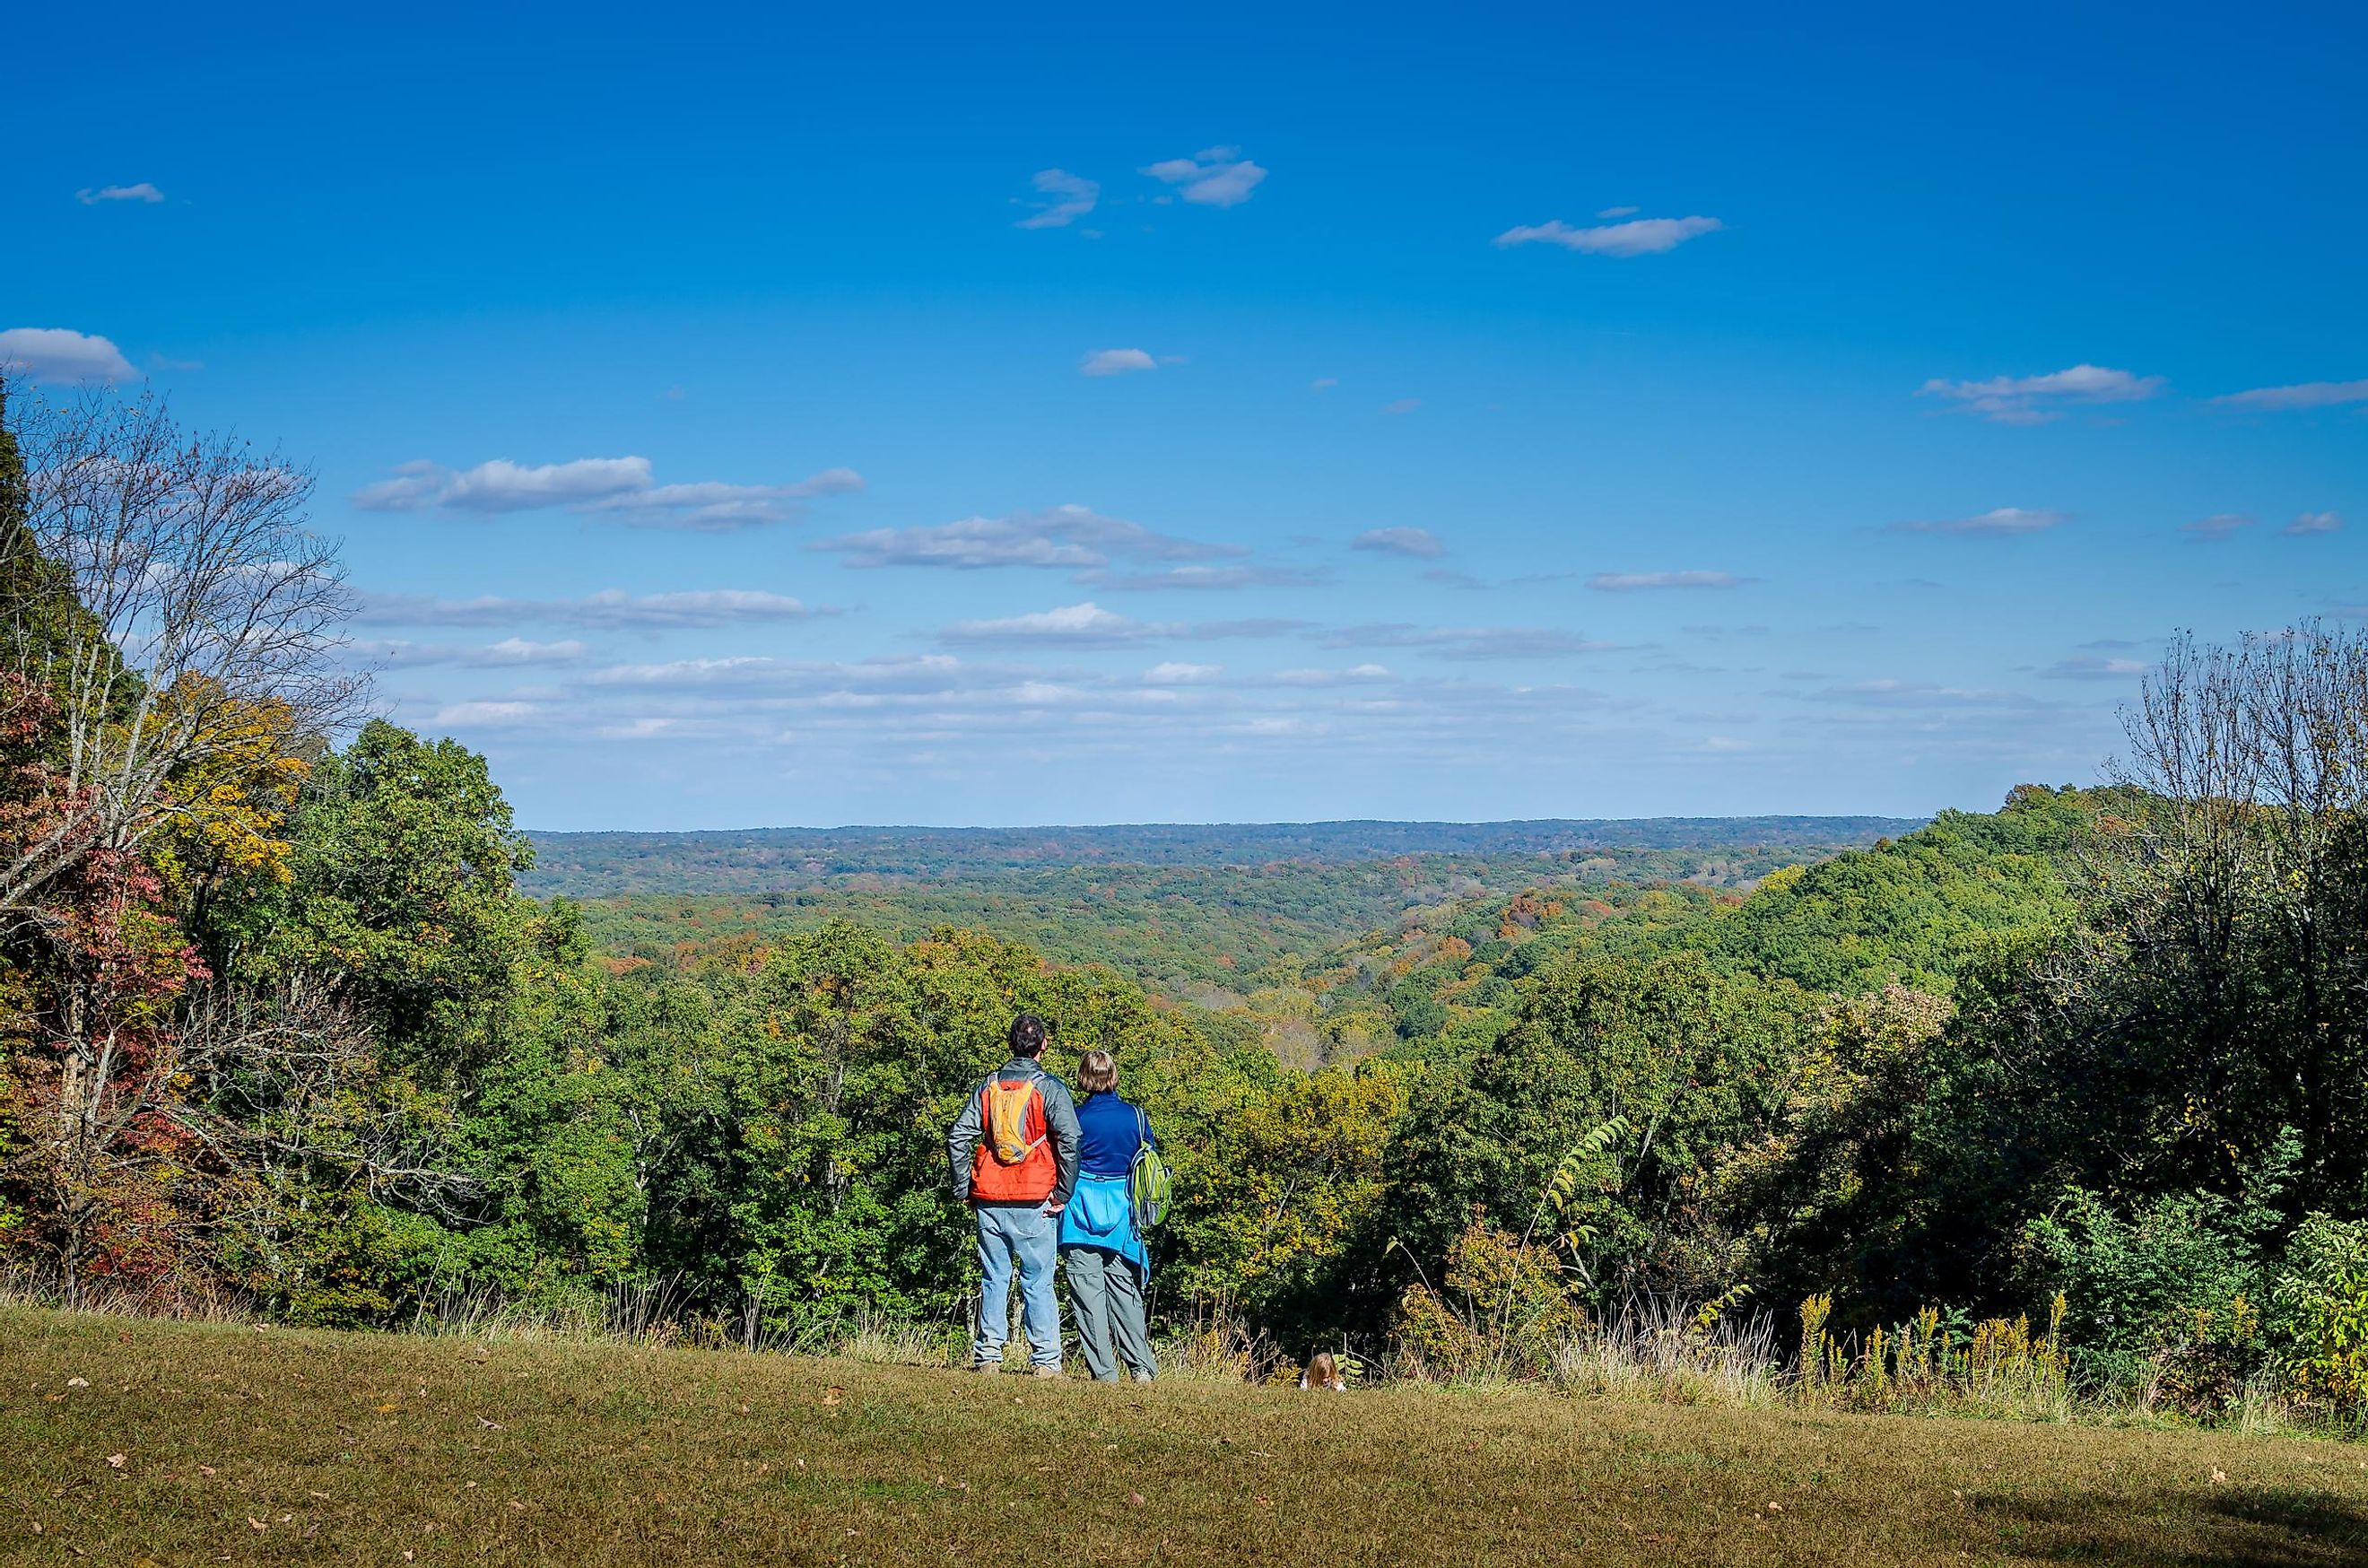 Hikers admiring the scenery at Brown County State Park in fall.